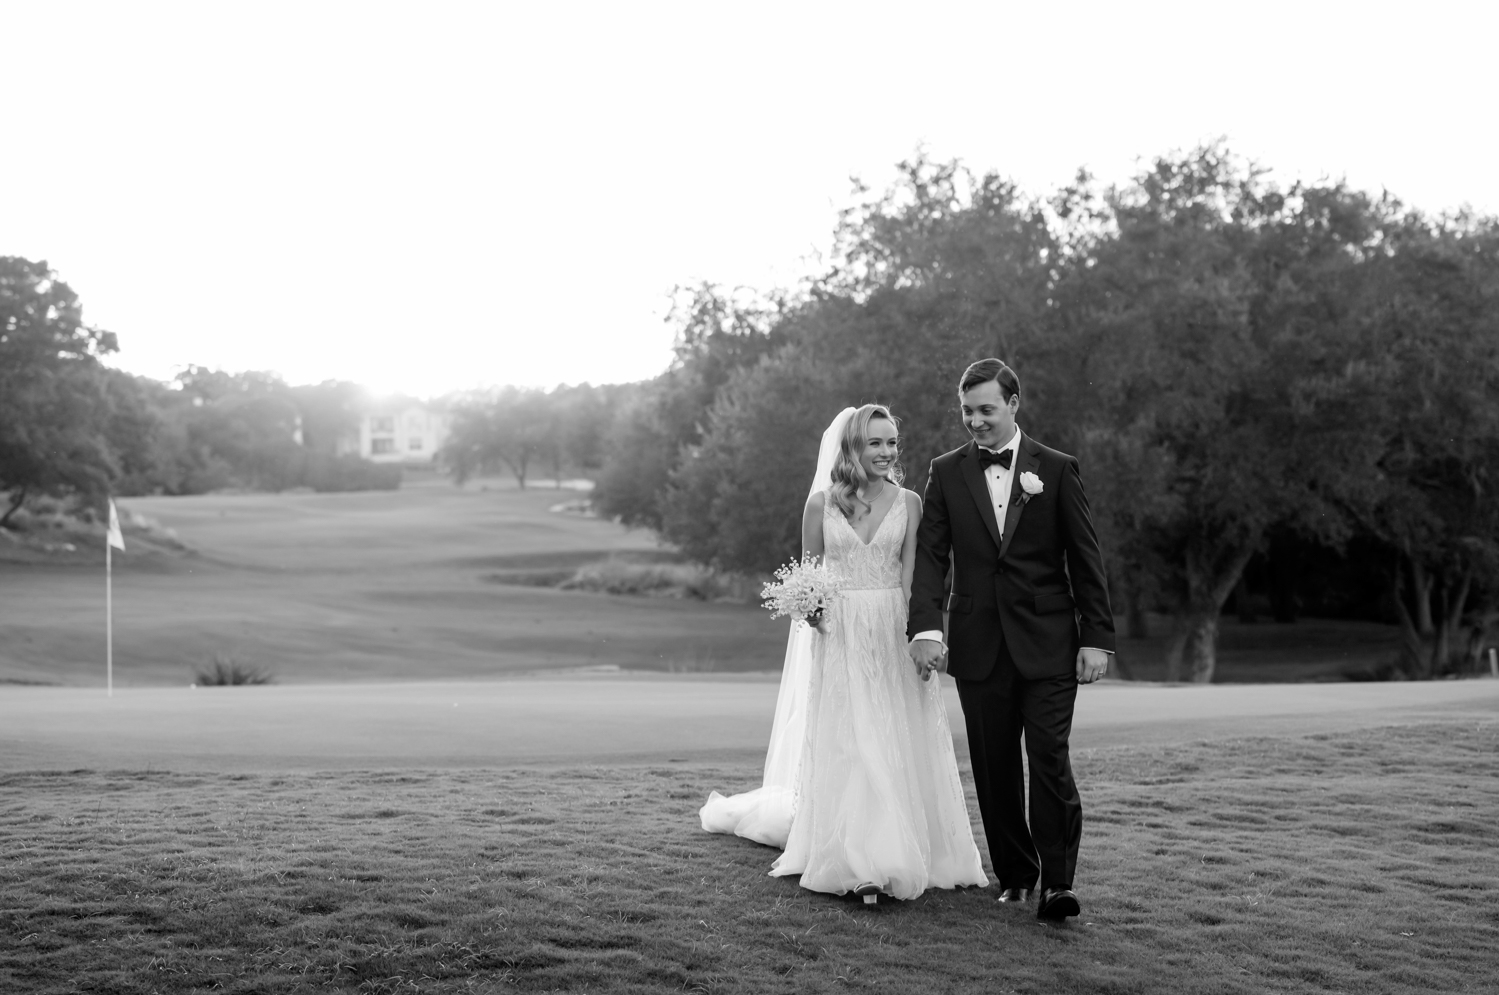 The bride and groom hold hands and walk on the Omni Barton Creek golf course together